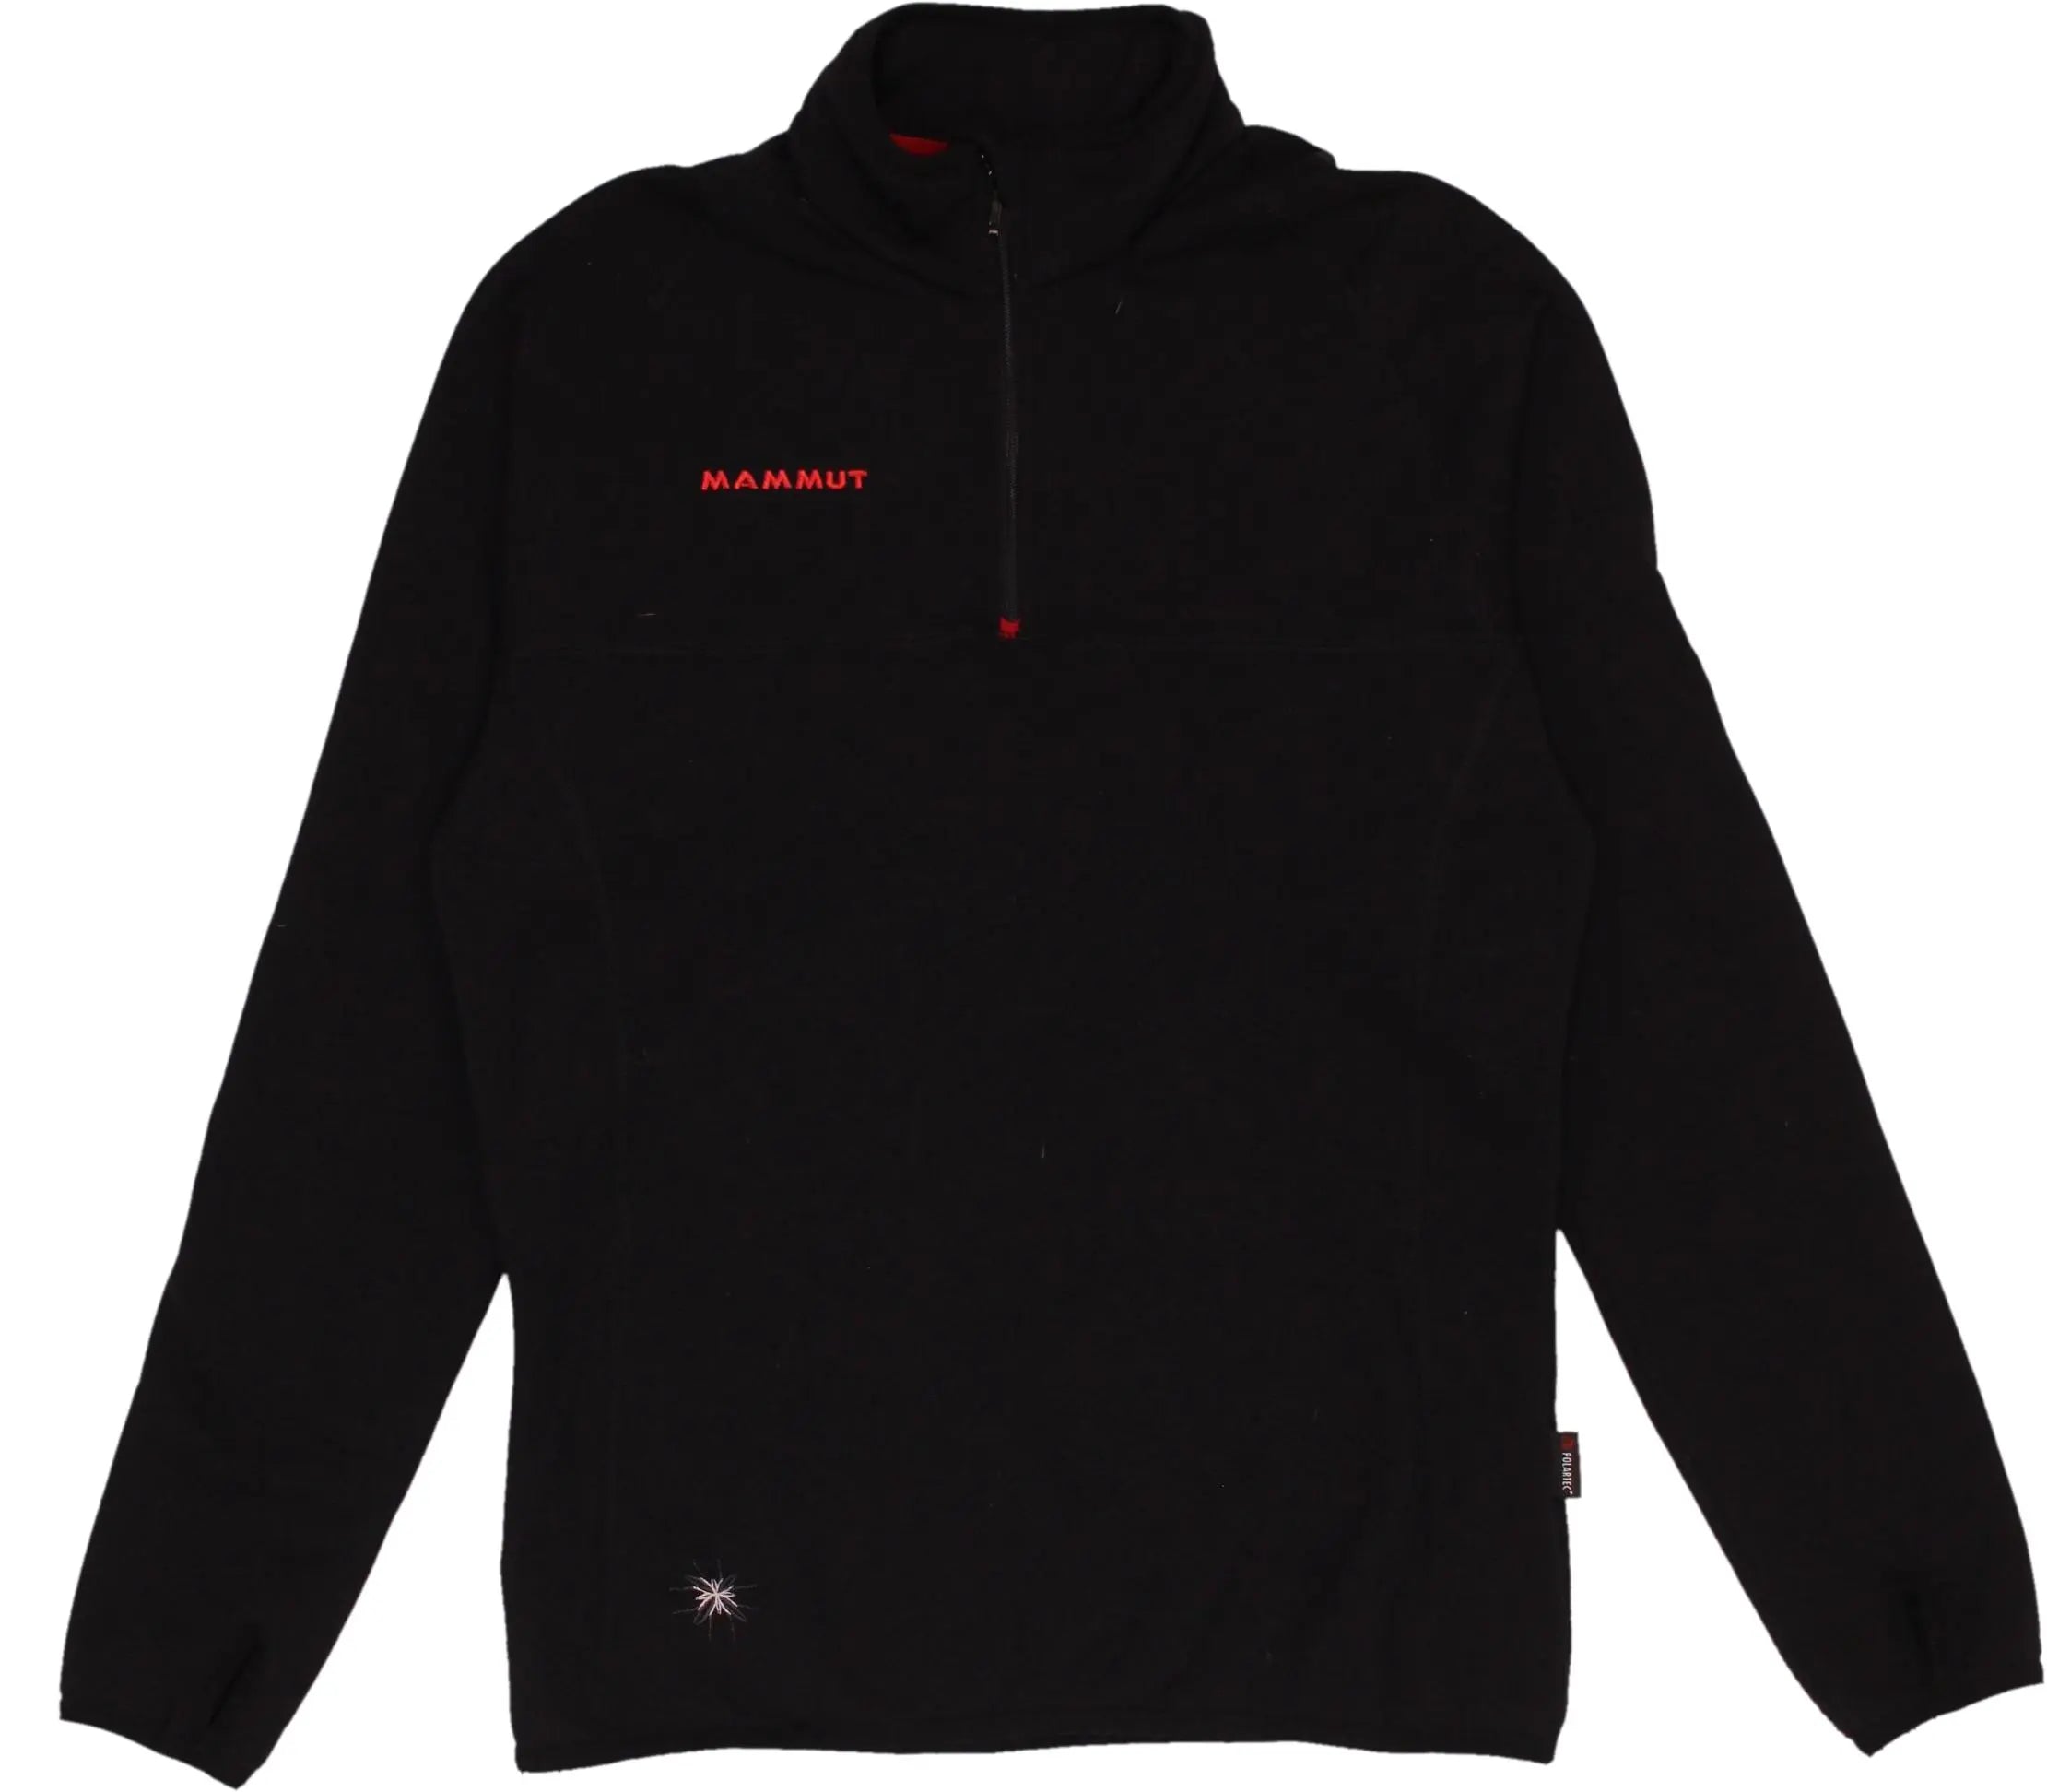 Mammut - Black Long Sleeve Fleece Top by Mammut- ThriftTale.com - Vintage and second handclothing